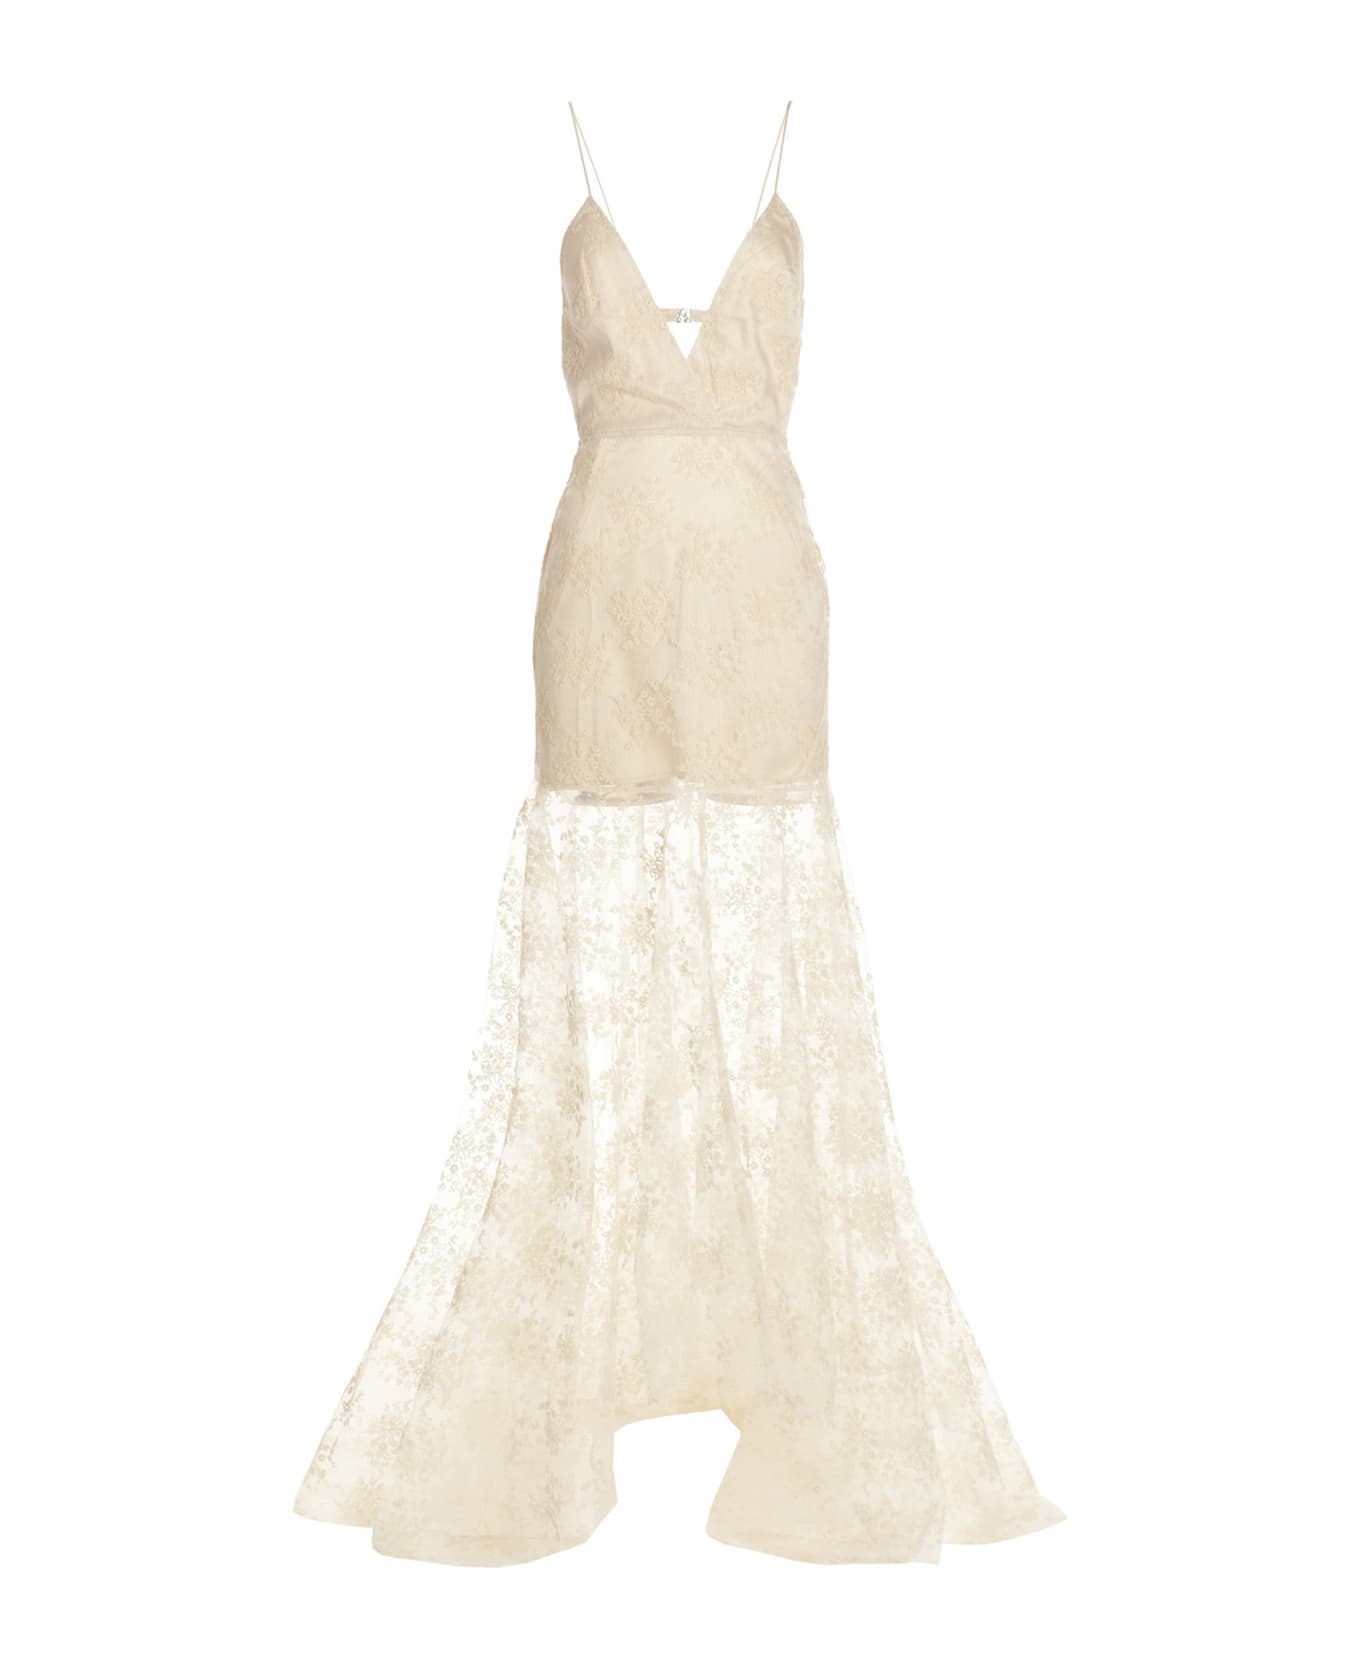 Rotate by Birger Christensen 'miley' Capsule 'miley' Capsule Dyee - White